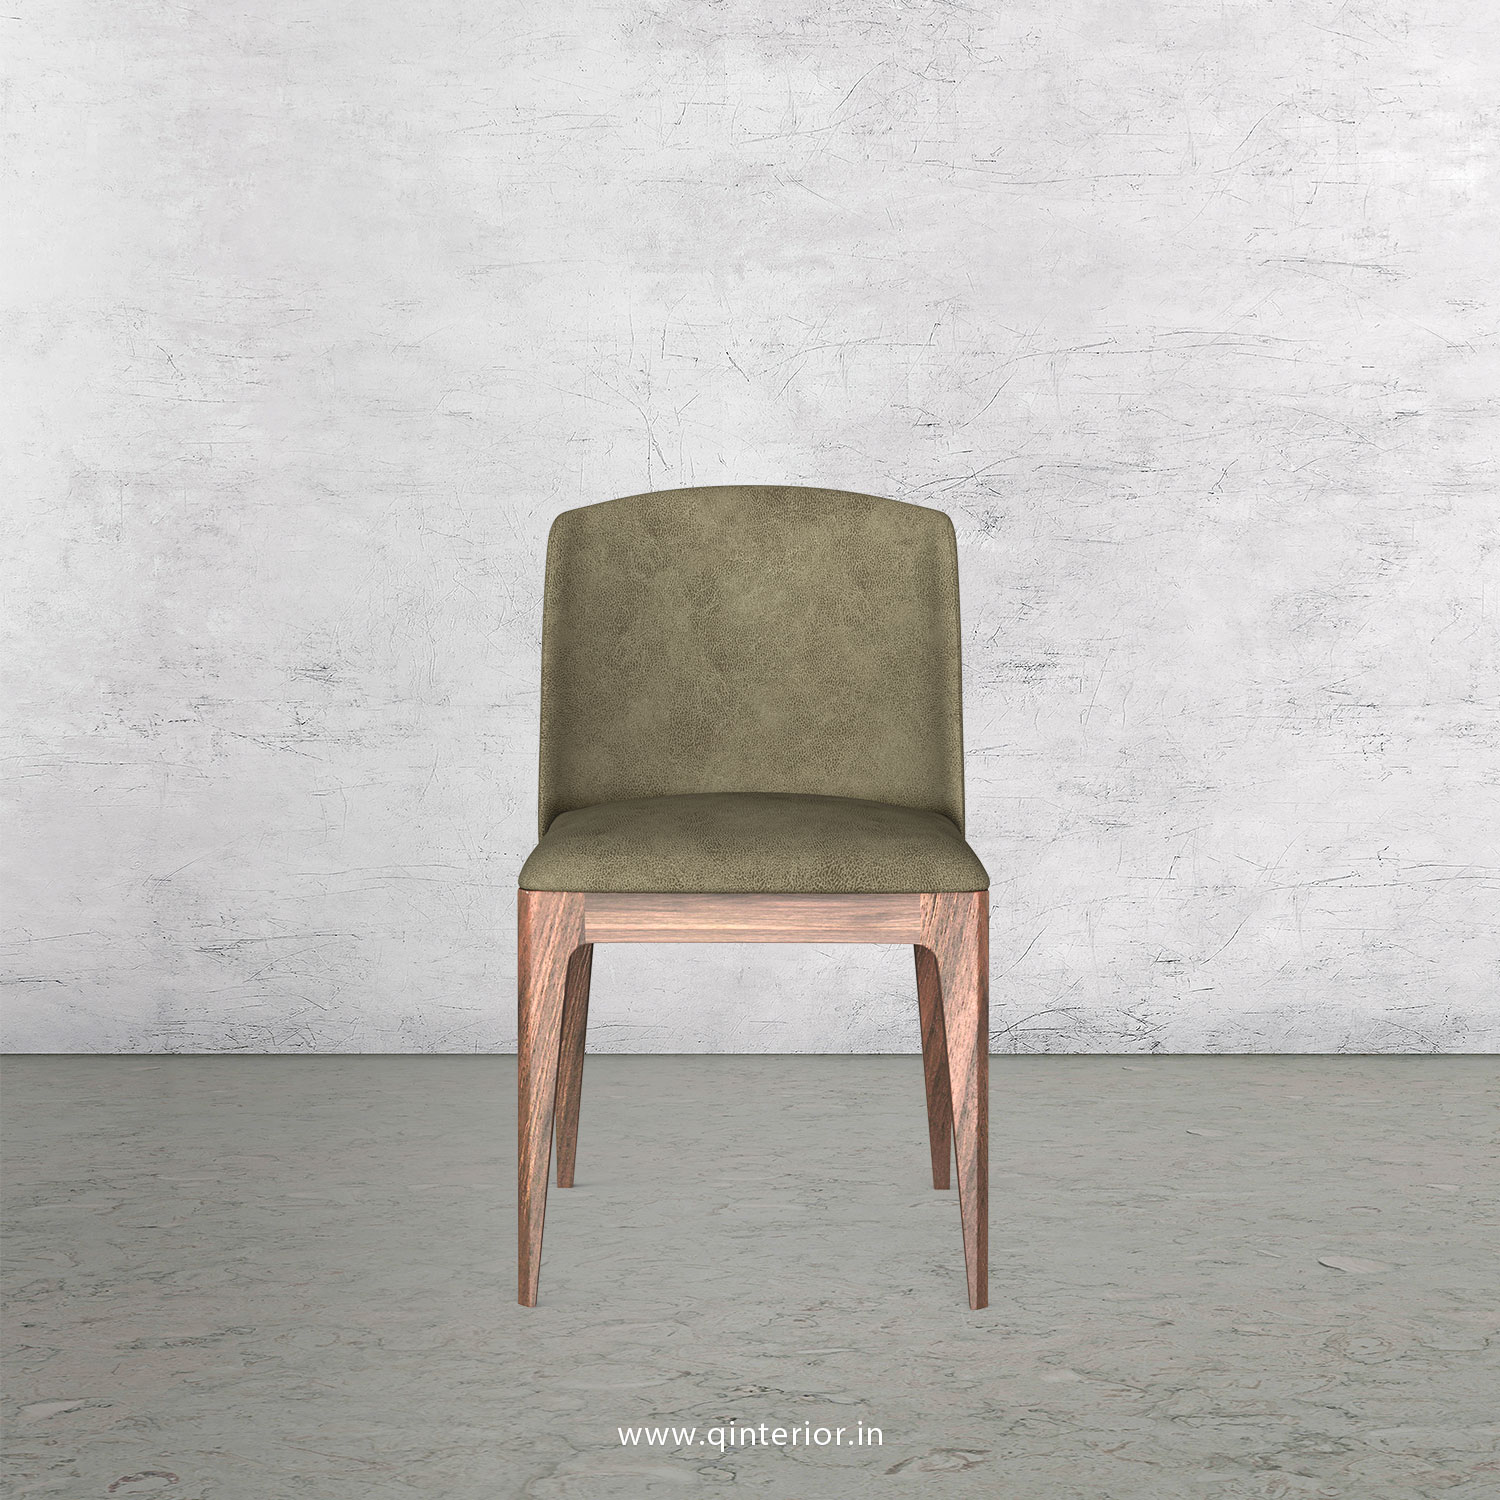 Cario Dining Chair in Fab Leather Fabric - DCH001 FL03